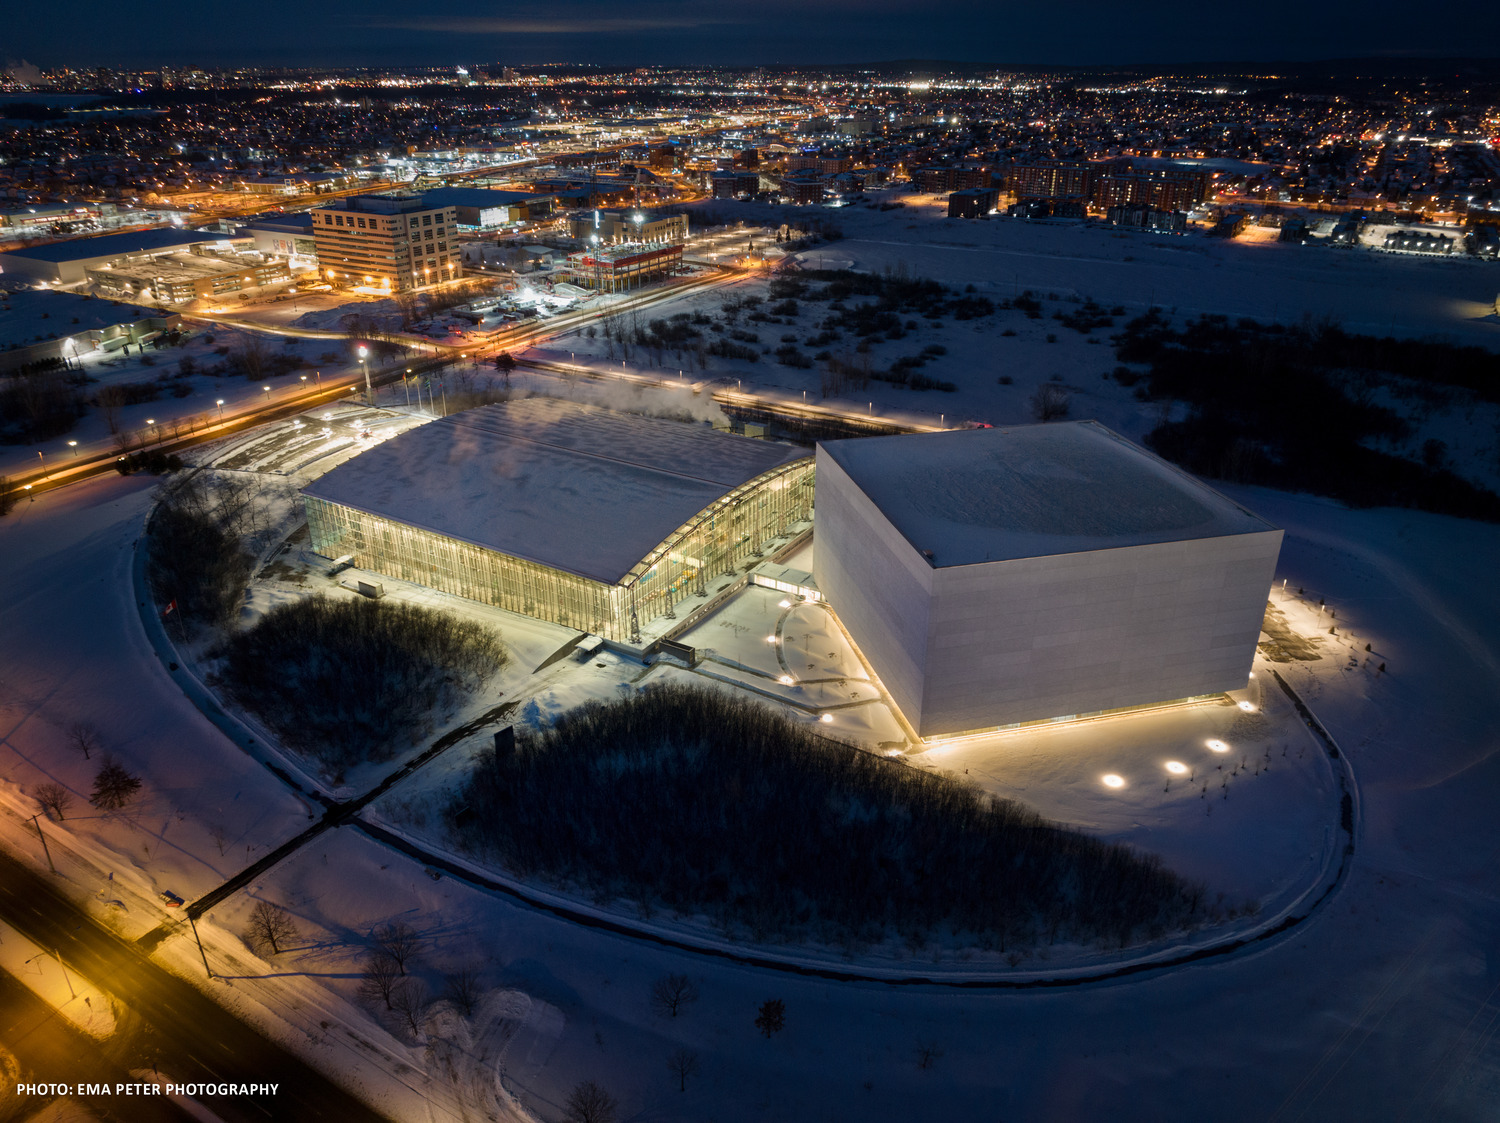 Aerial night view of a modern, illuminated building surrounded by snow, with city lights in the background.